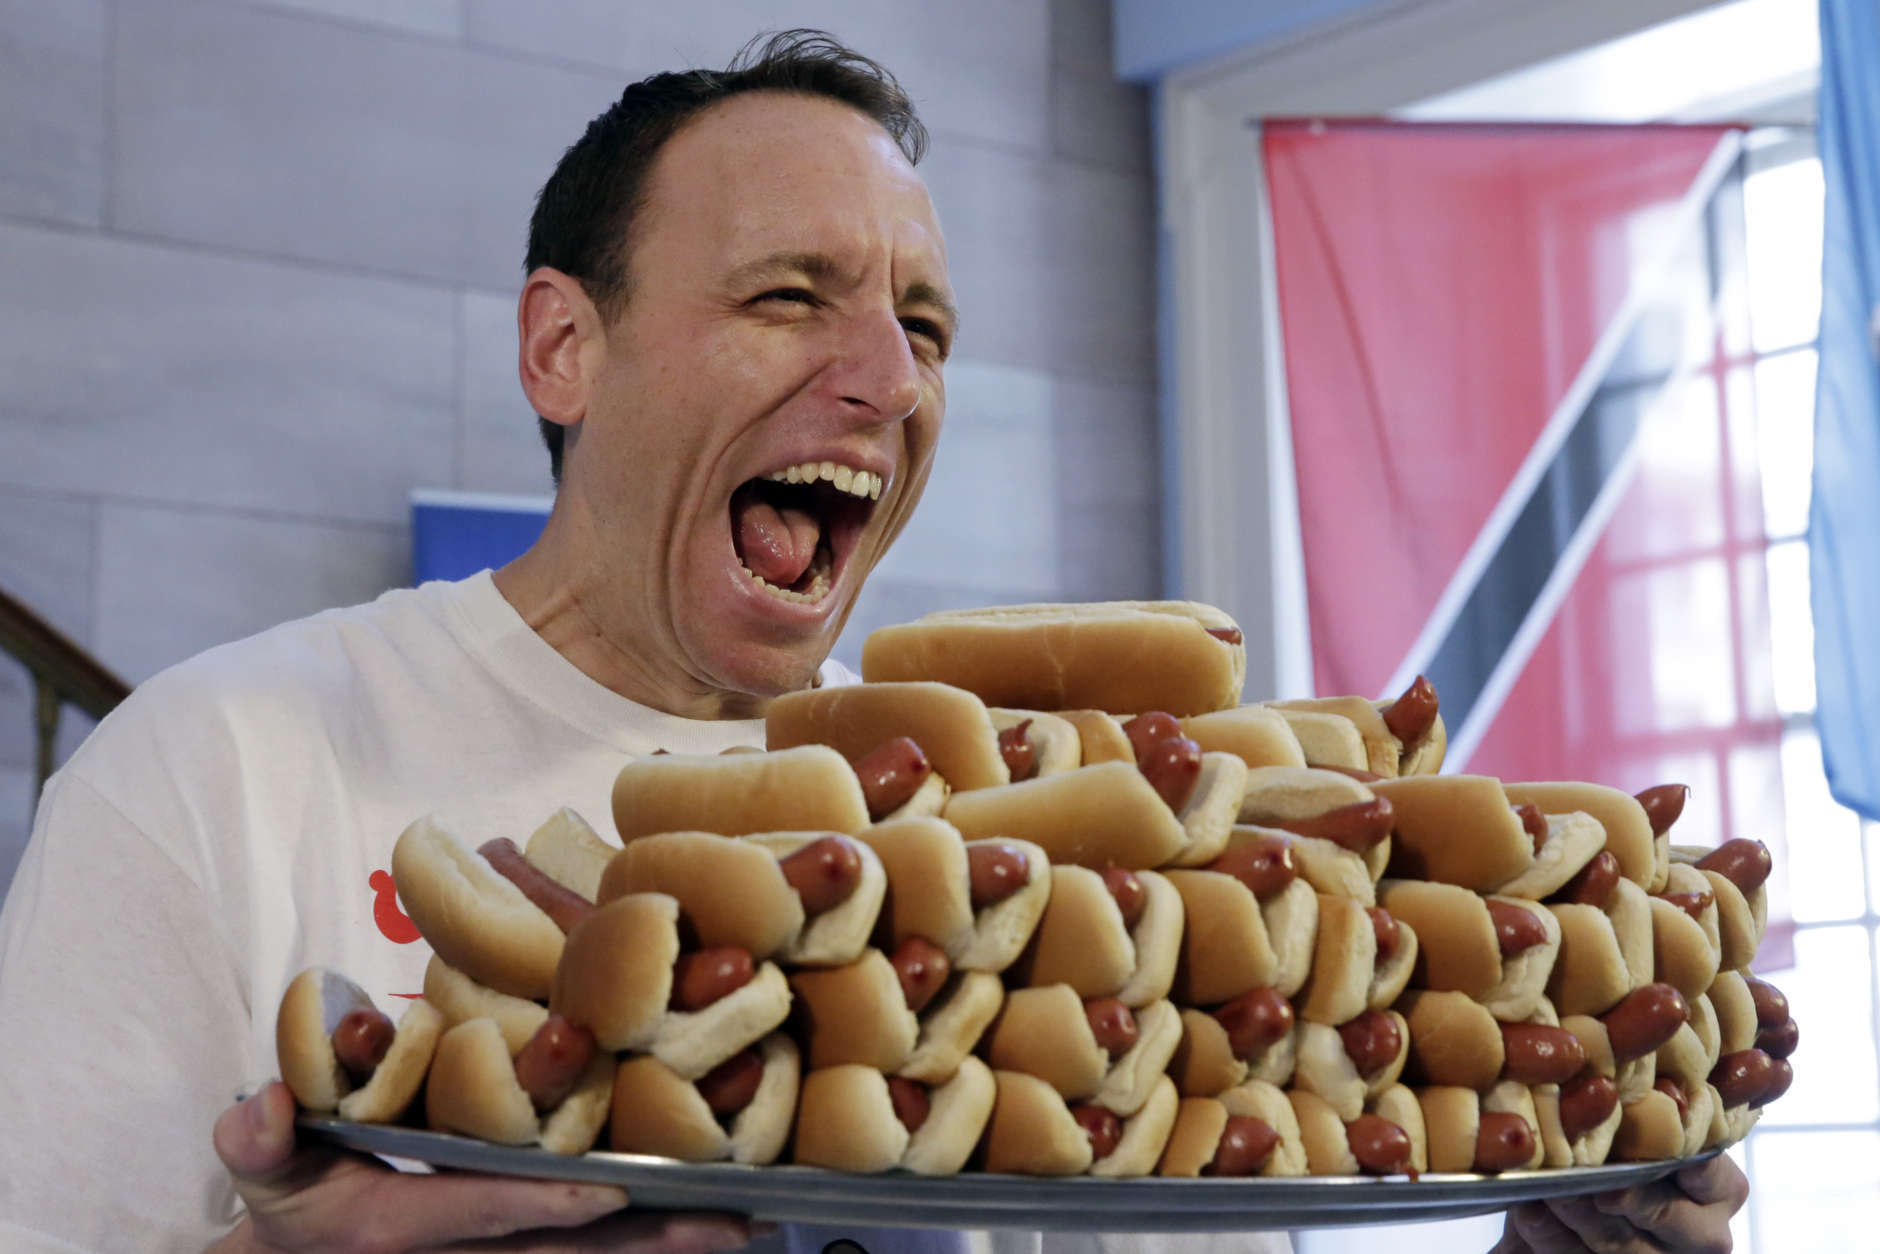 Current men's champion Joey Chestnut, of San Jose, Calif., holds a tray of hot dogs during the weigh-in for the 2017 Nathan's Hot Dog Eating Contest, in Brooklyn Borough Hall, in New York, Monday, July 3, 2017. Chestnut weighed-in at 221.5 pounds. (AP Photo/Richard Drew)